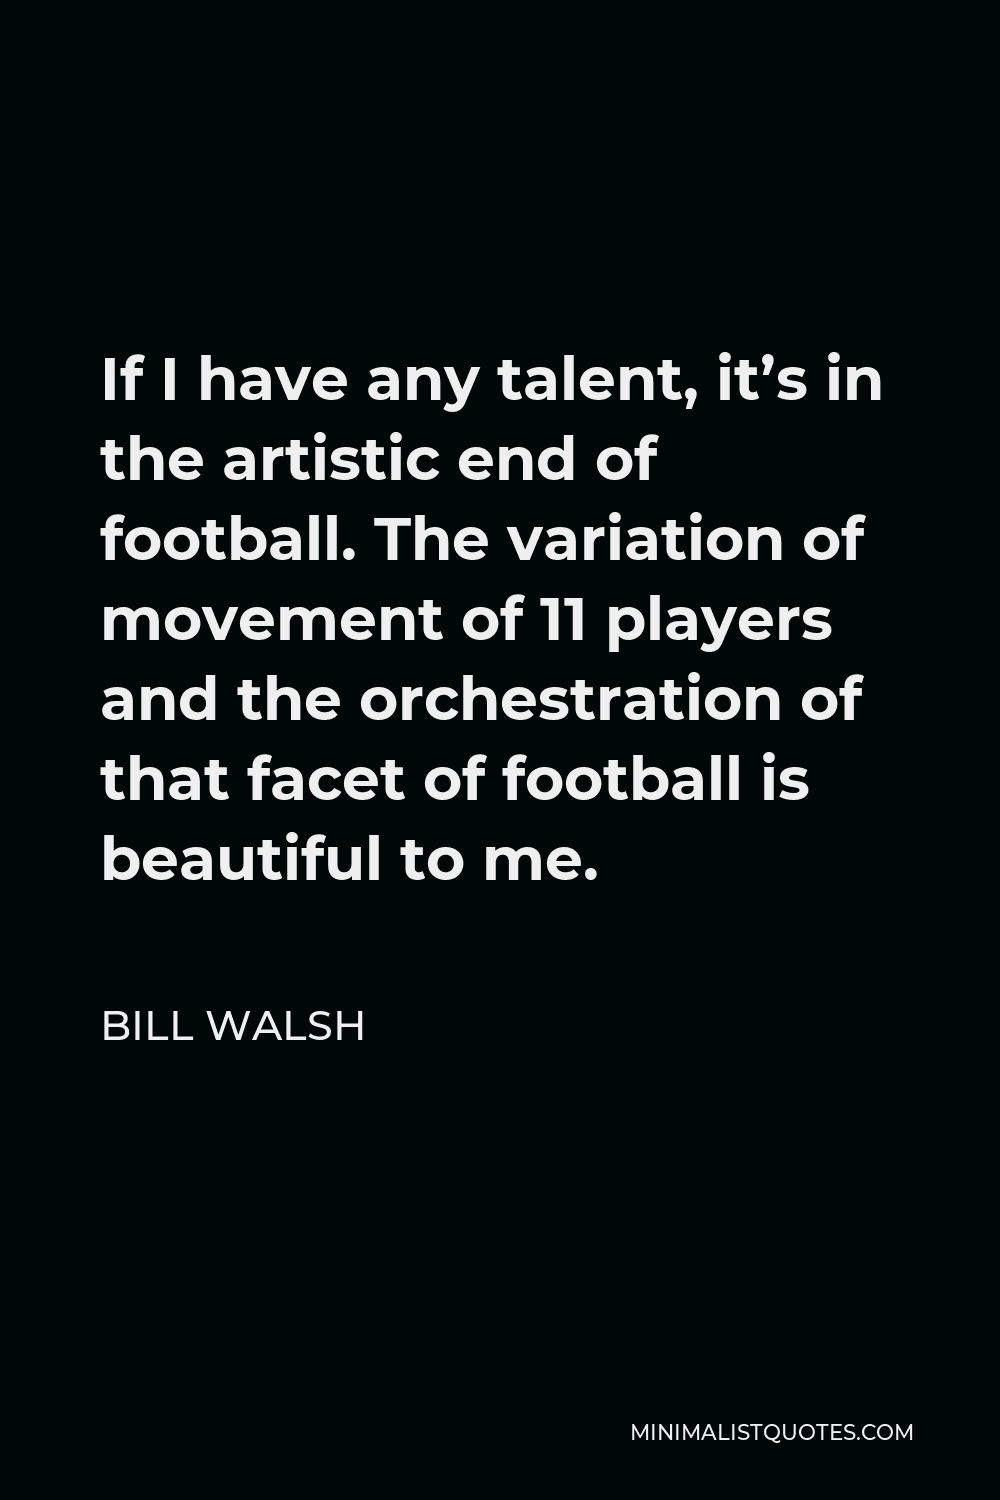 Bill Walsh Quote - If I have any talent, it’s in the artistic end of football. The variation of movement of 11 players and the orchestration of that facet of football is beautiful to me.